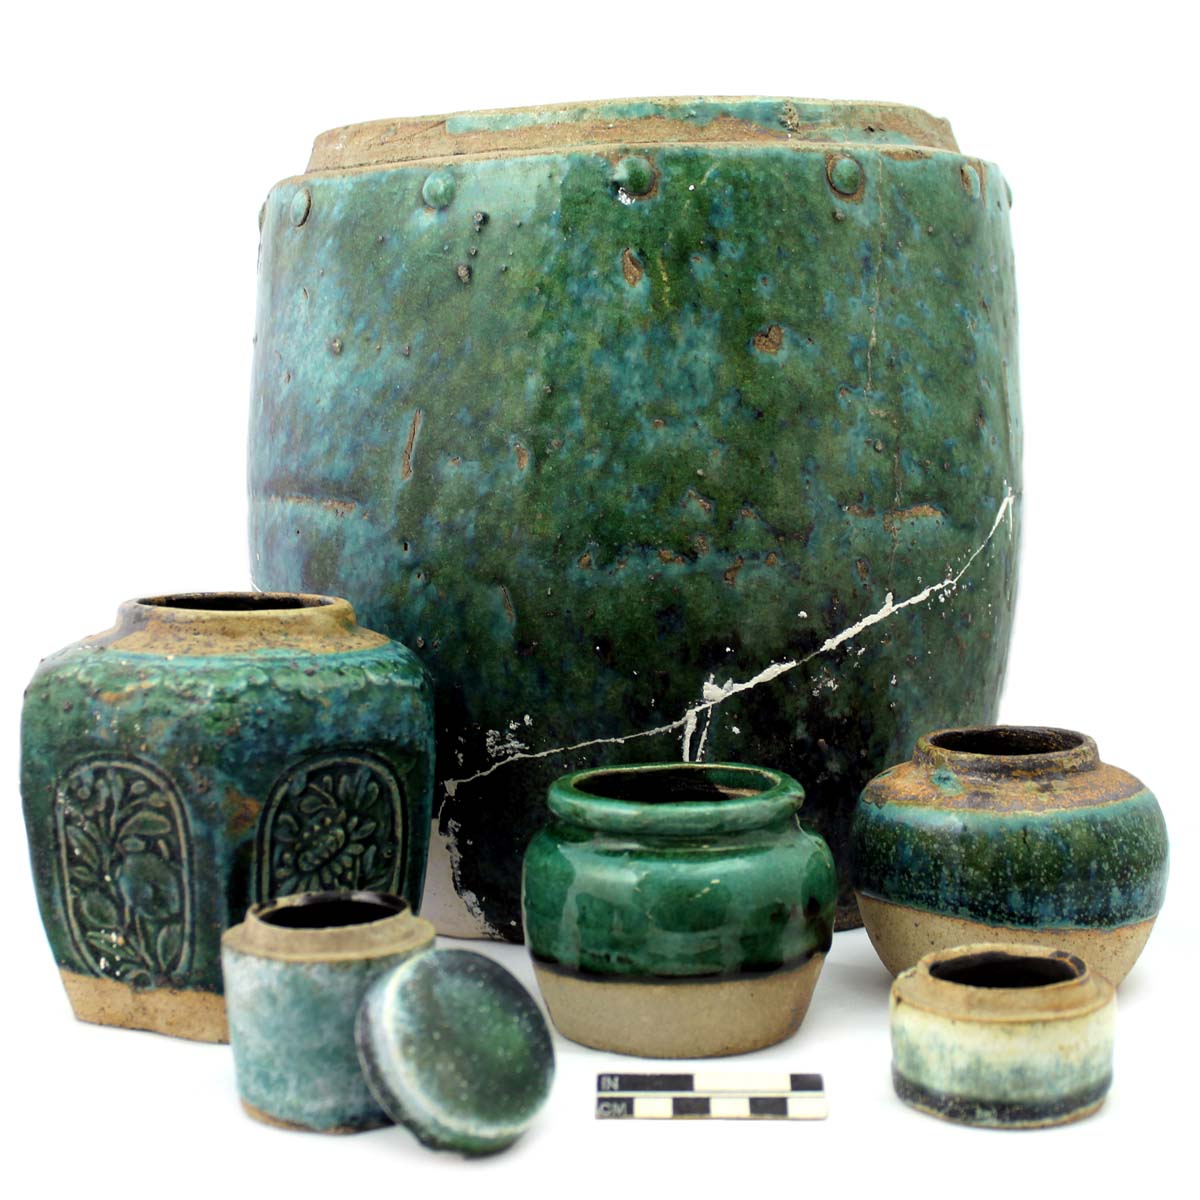 Barrel jar (top) and other green glazed stonewares.